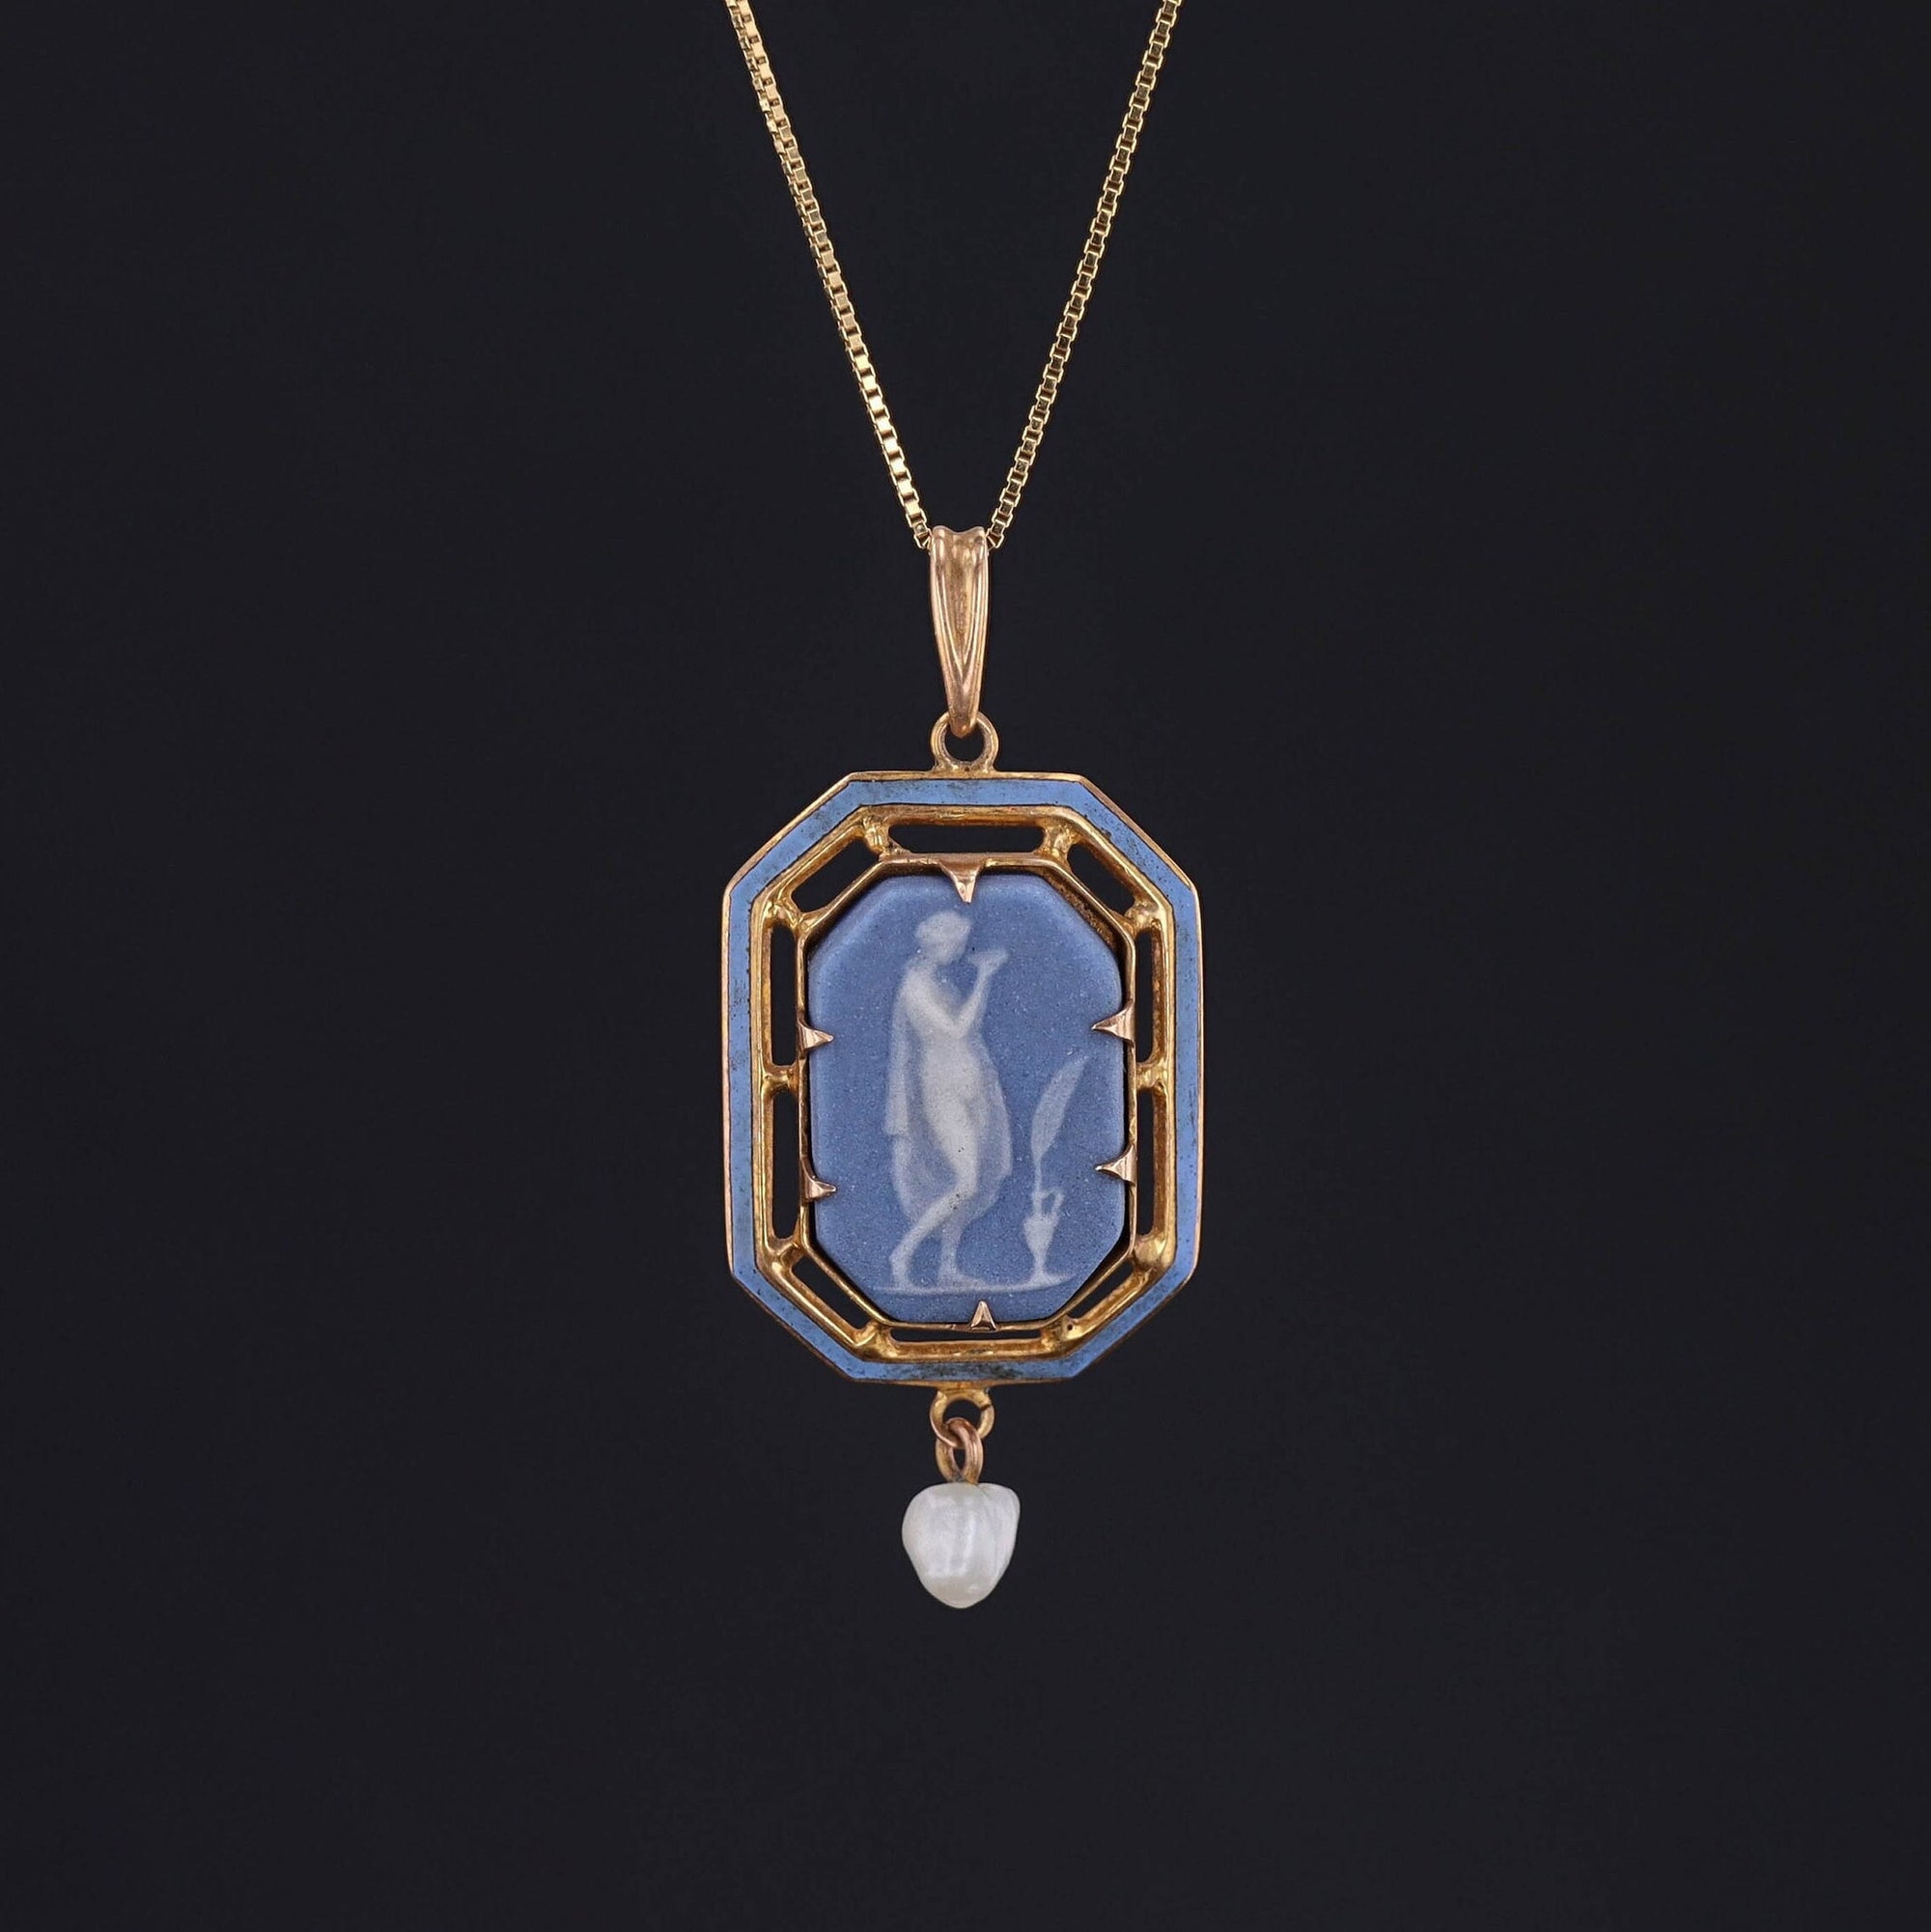 Antique Wedgwood Cameo Pendant of 14k Gold